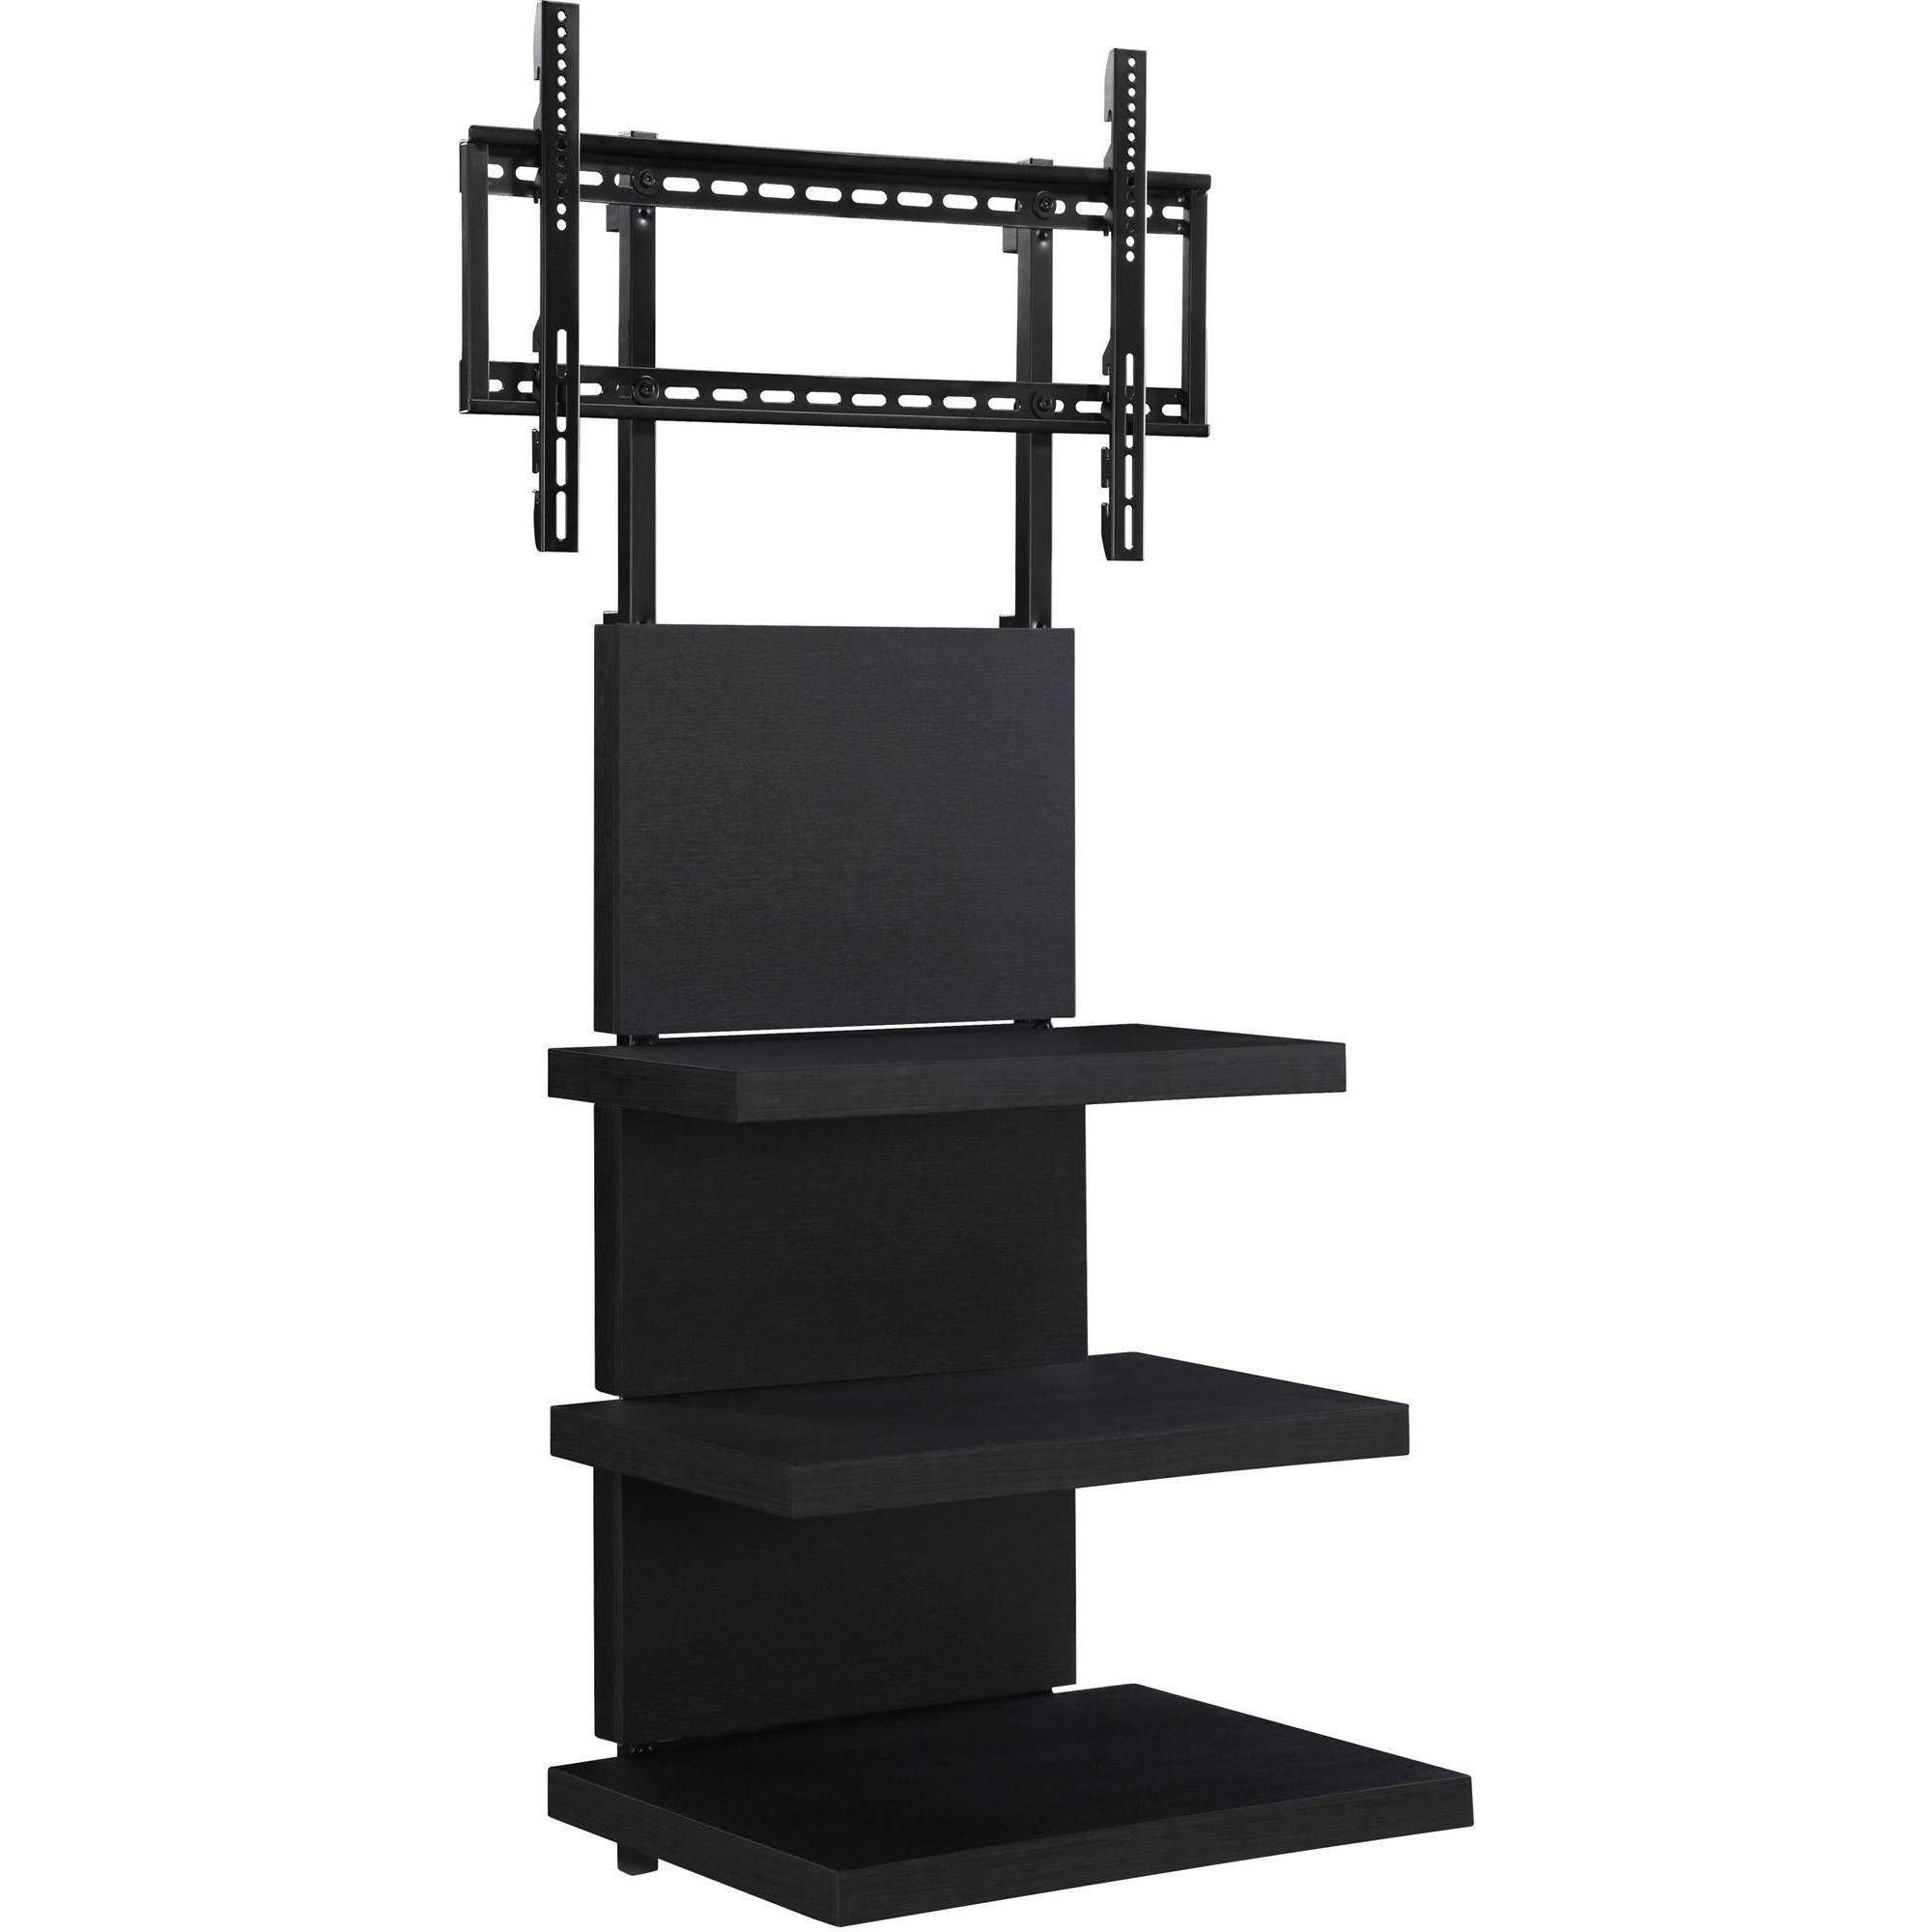 Wall Shelves Design Wall Mount Tv Stand With Shelves Soundbar In Wall Mounted Black Glass Shelves (View 11 of 15)